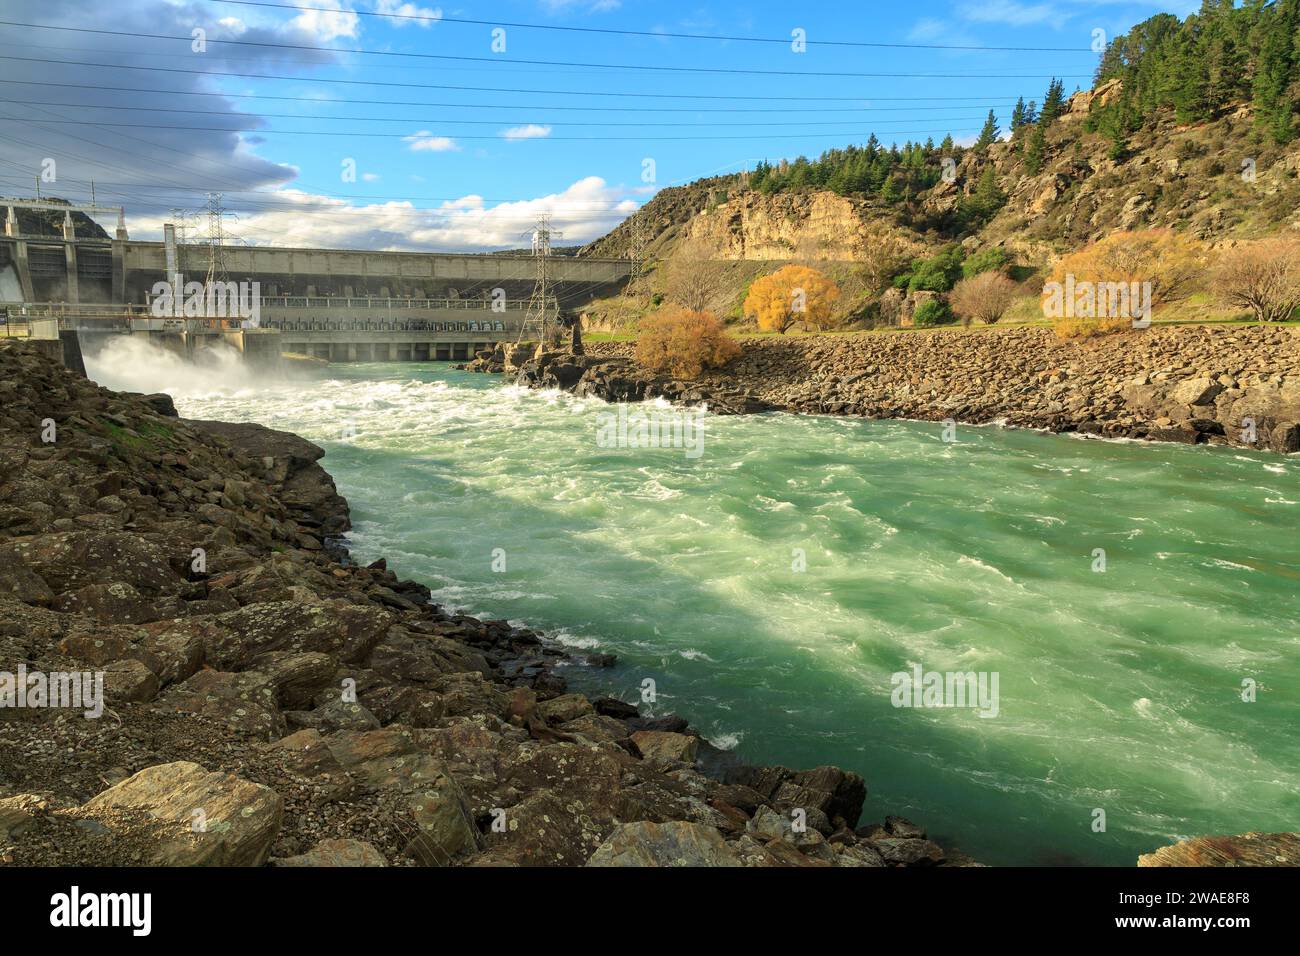 The surging Clutha River just downstream from the Roxburgh Hydro Dam in the South Island of New Zealand Stock Photo